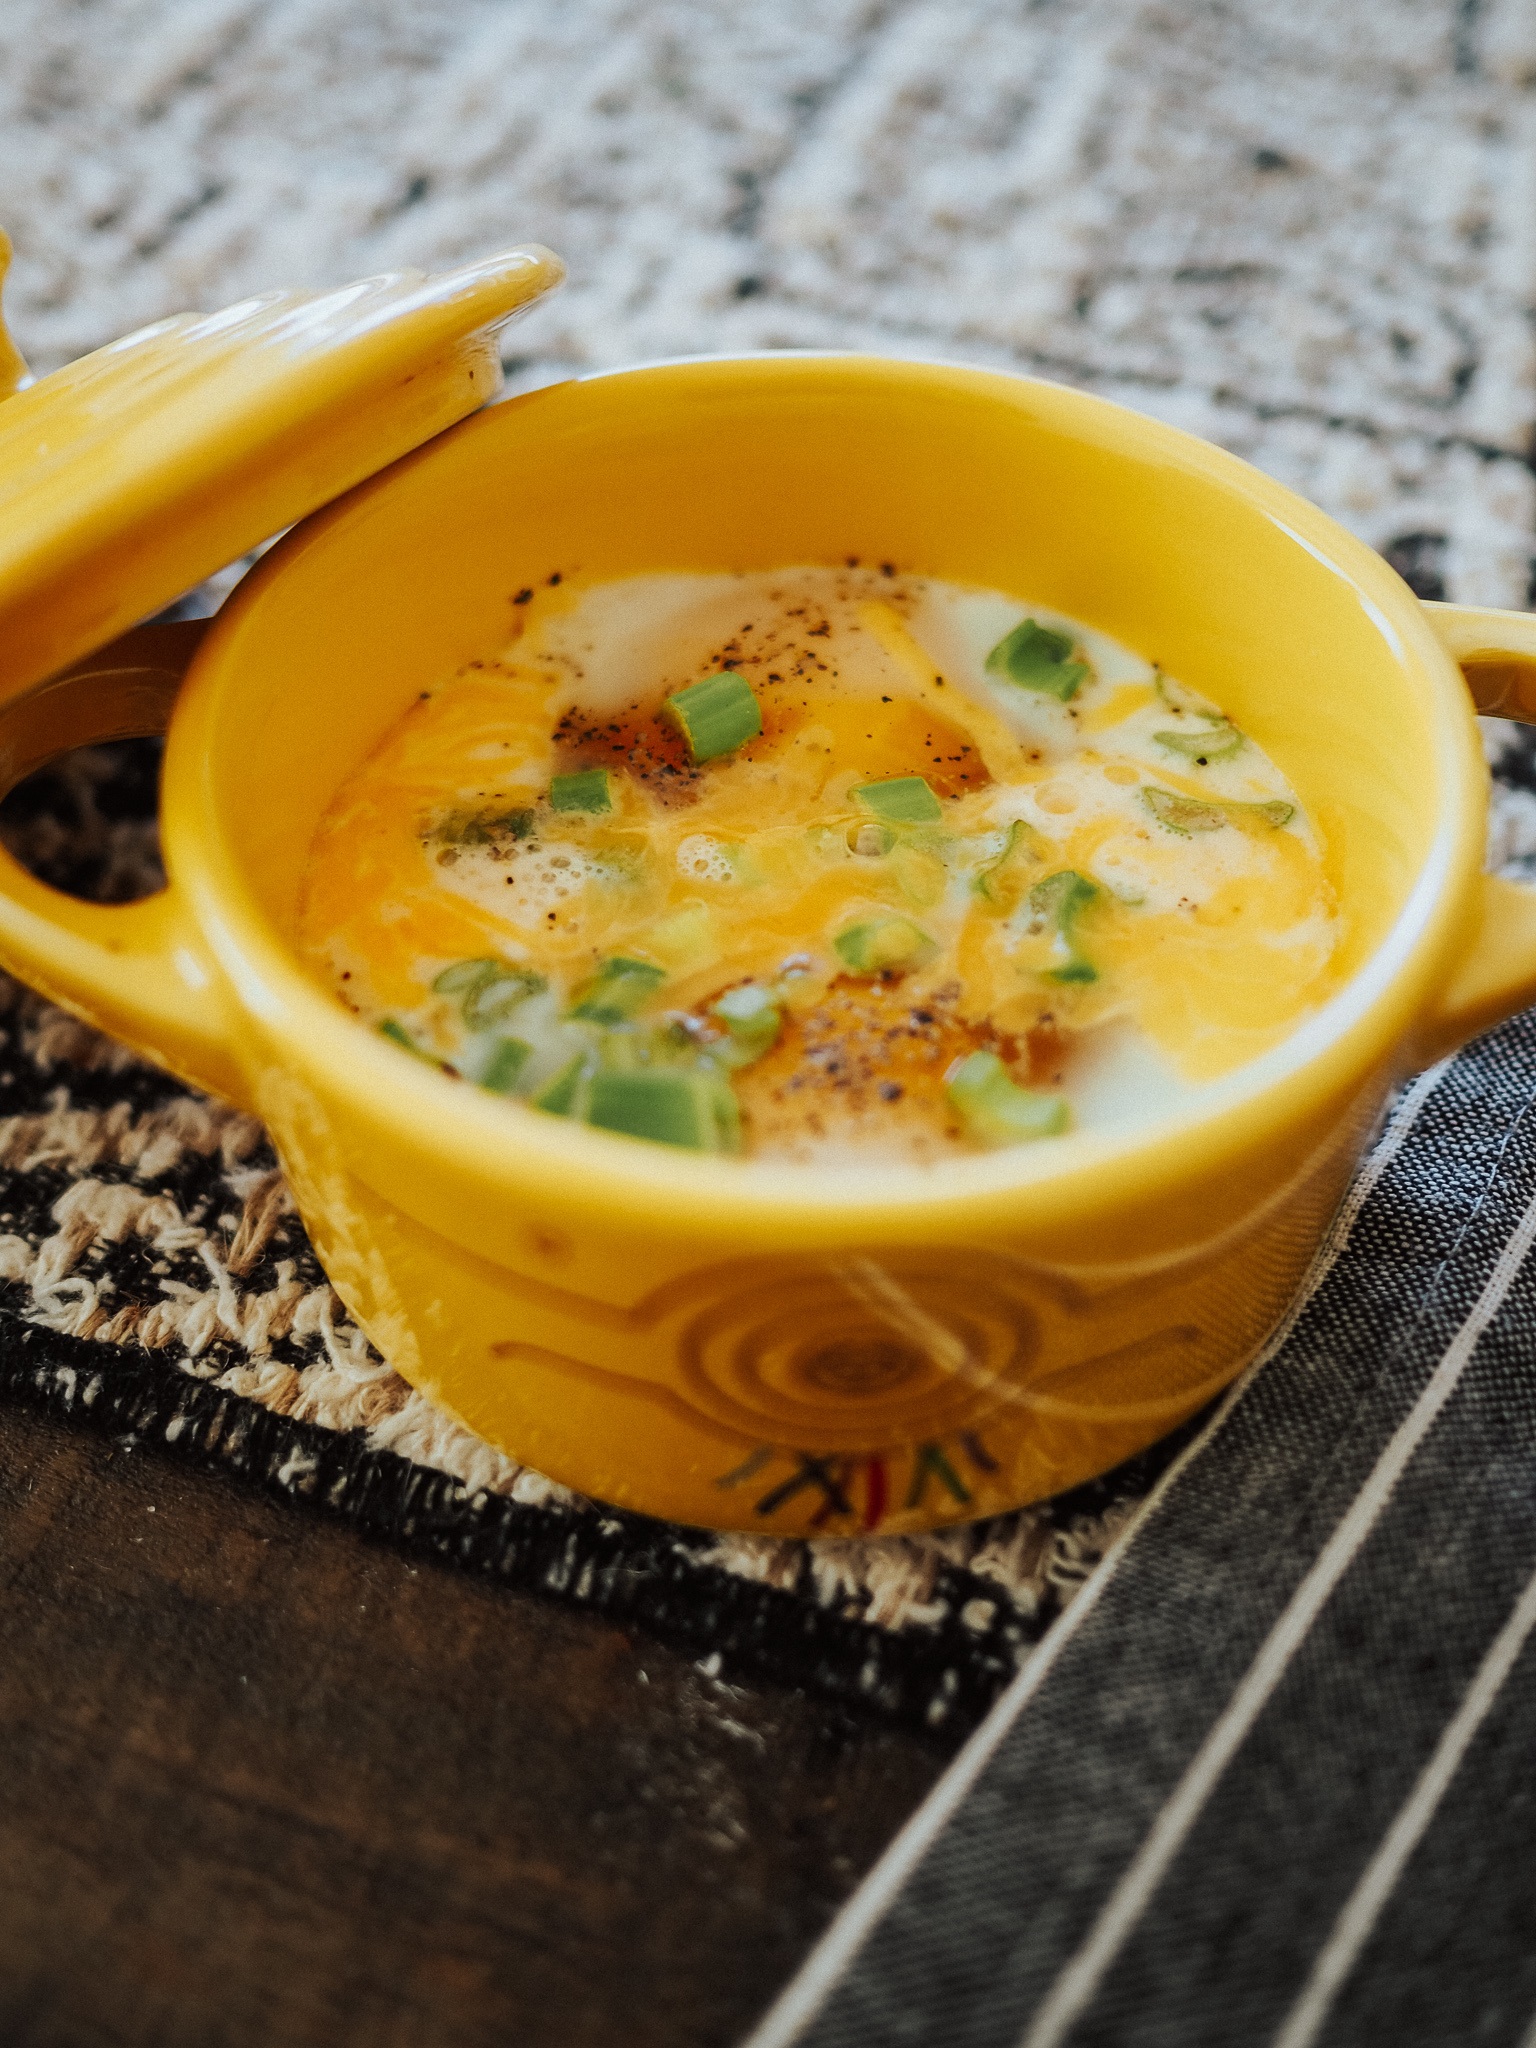 Make delicious Oeuf en Cocotte at home with this easy recipe! Kelsey from Blondes & Bagels teaches a simple Oeuf en Cocotte recipe.